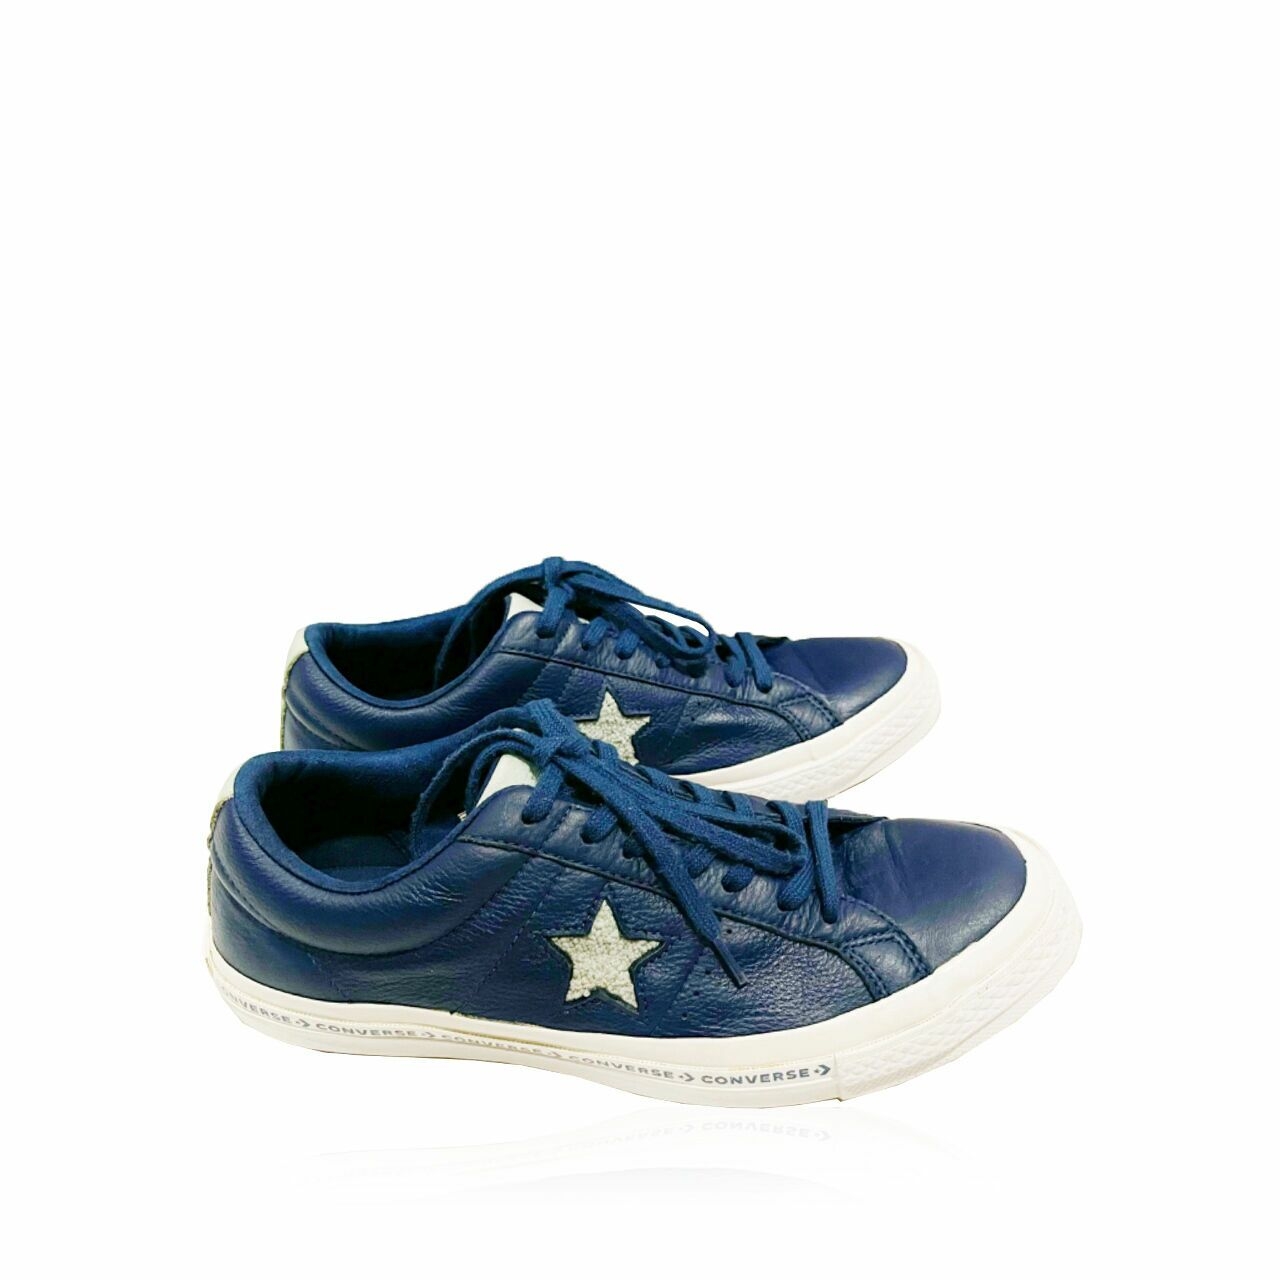 Converse Navy Plaid Sneakers